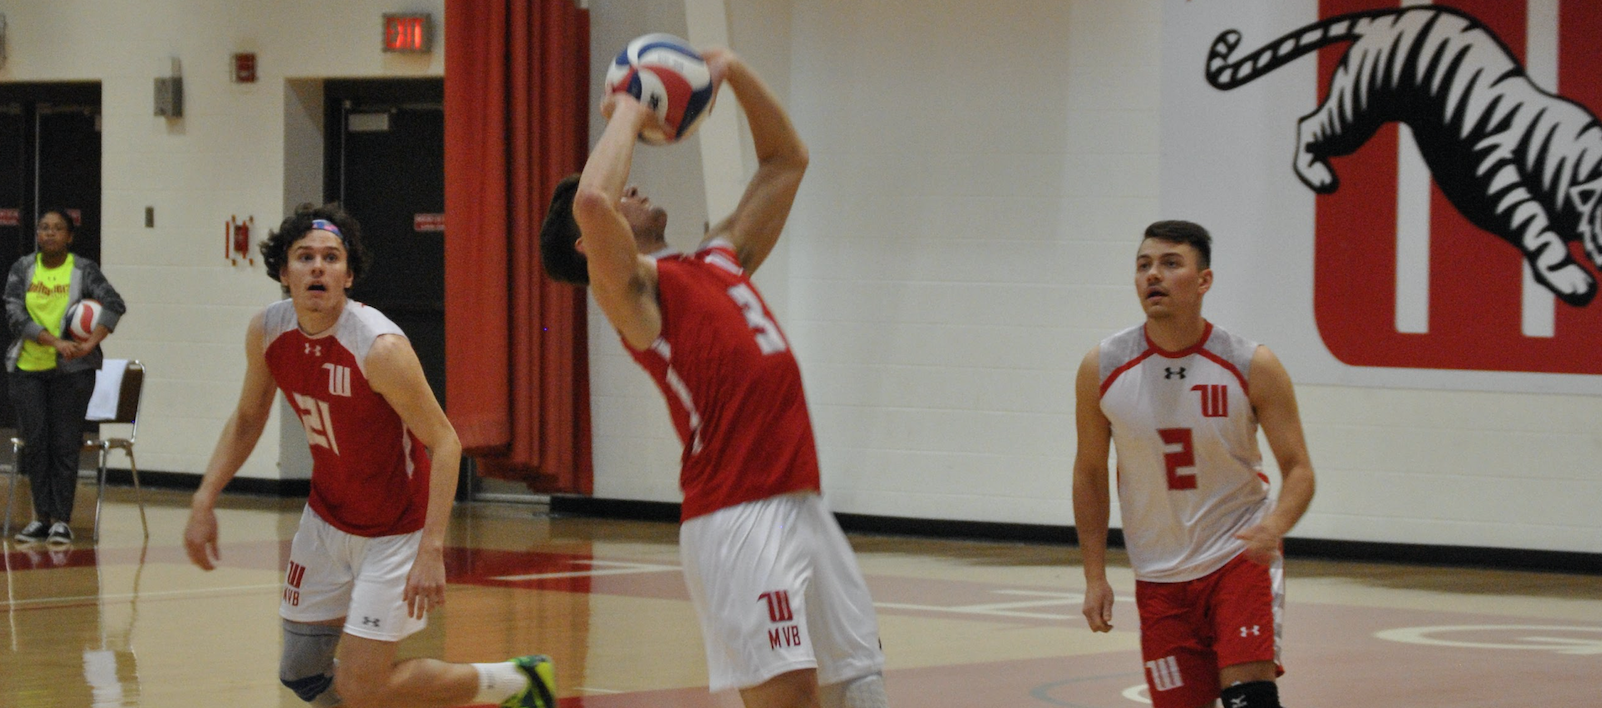 Men's Volleyball Opens Up 2017 Campaign With Three-Win Weekend